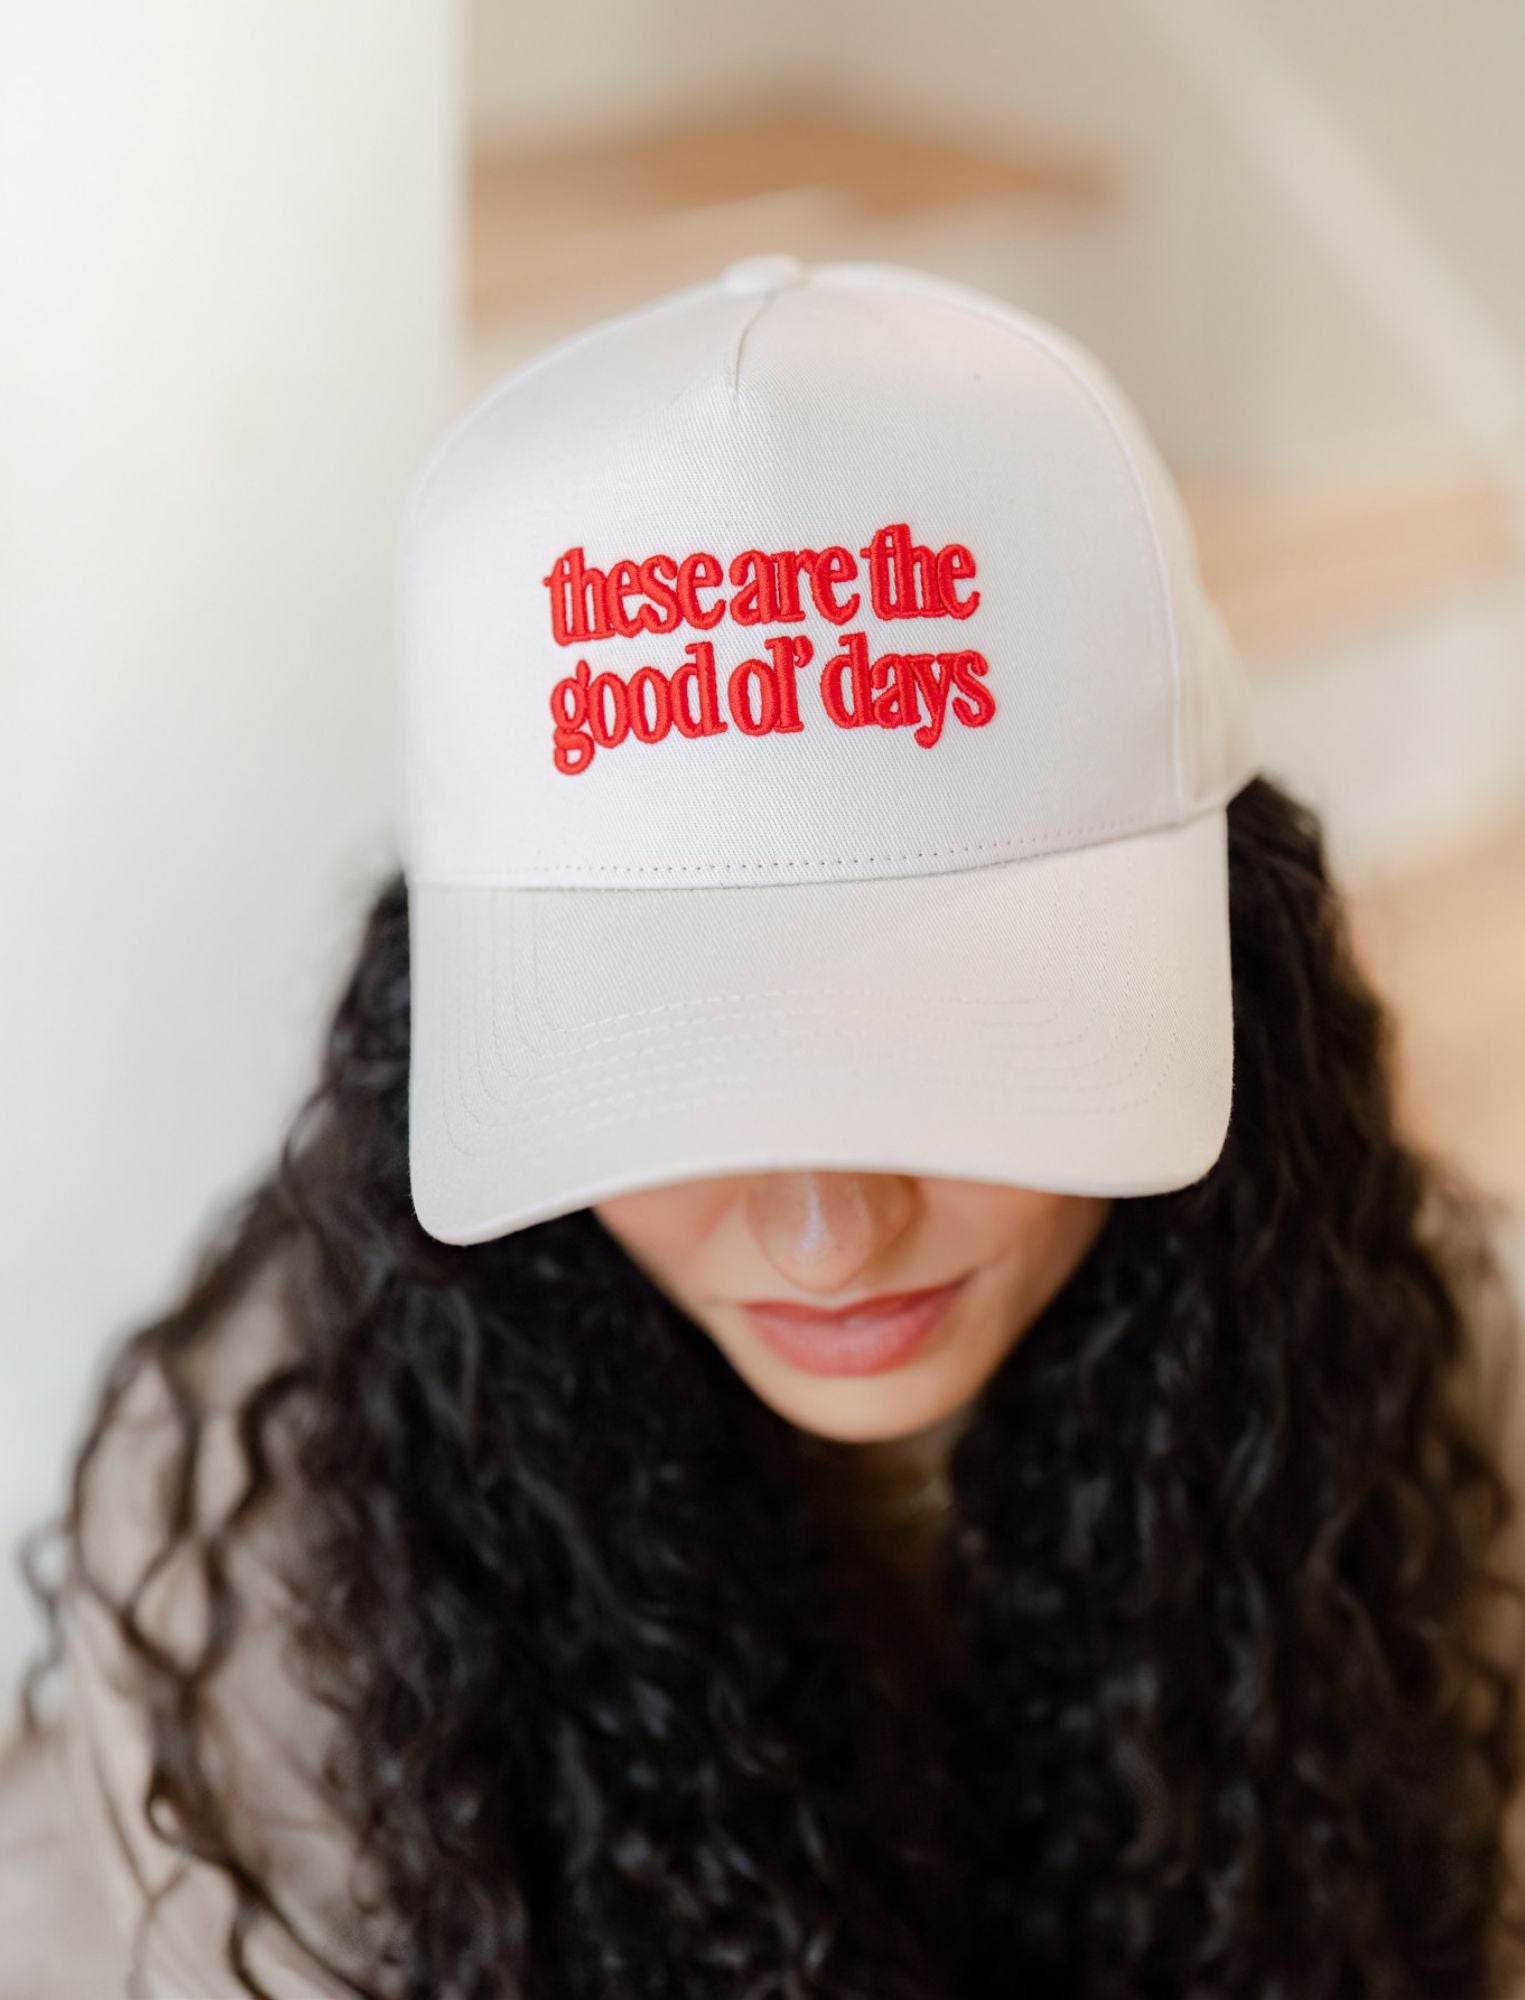 Hat: These are the good ol' days